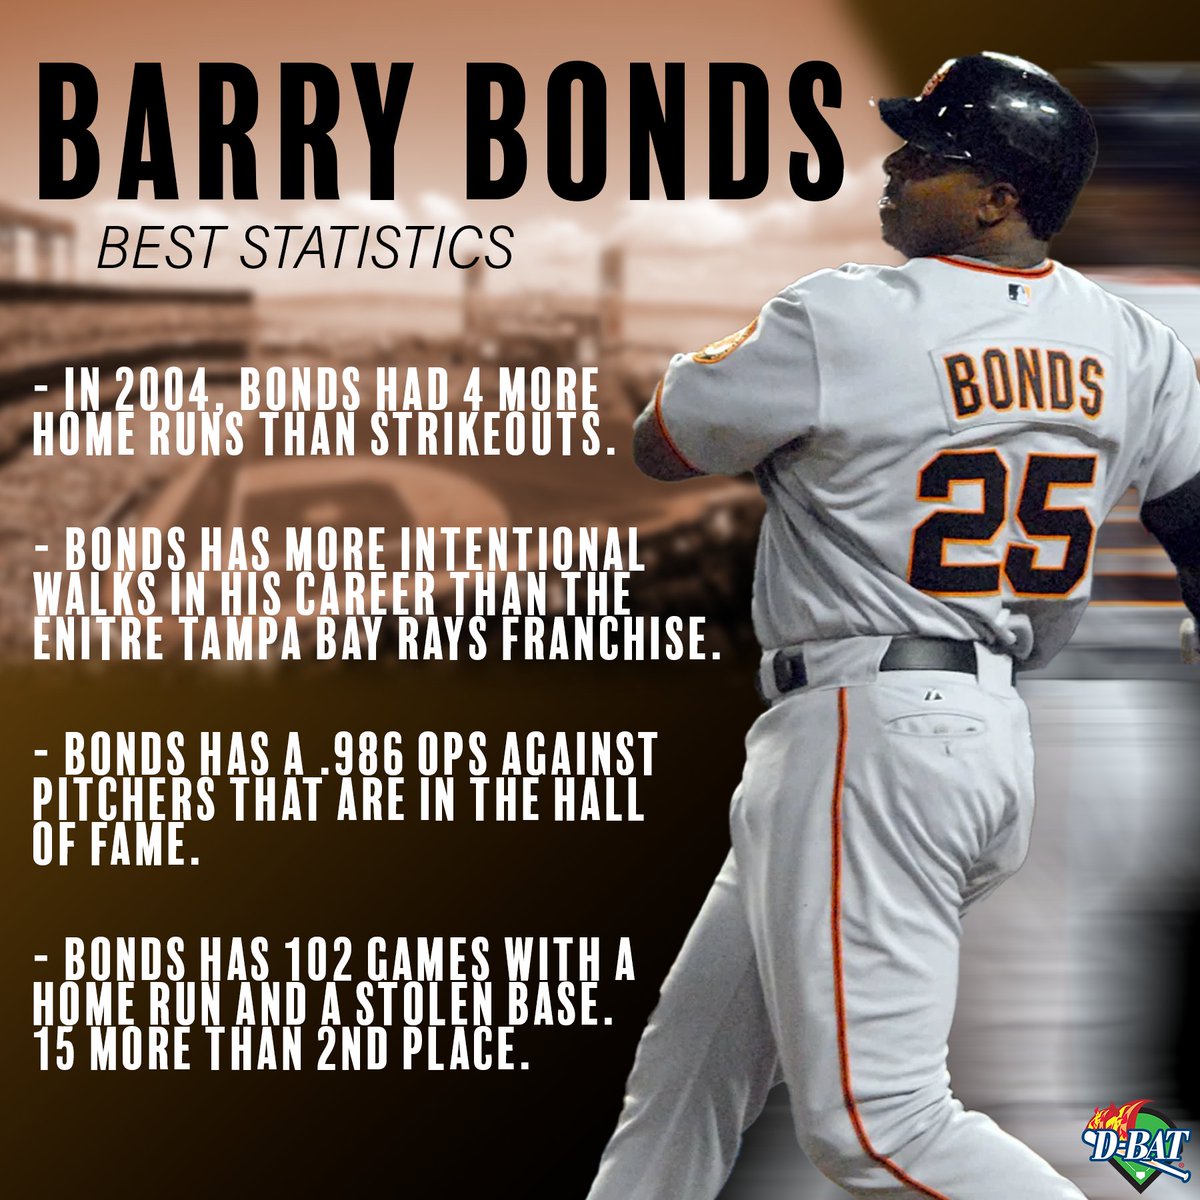 Some of Barry Bonds best statistics🤯 In your opinion, does Bonds belong in the Hall of Fame? #betterthanyesterday